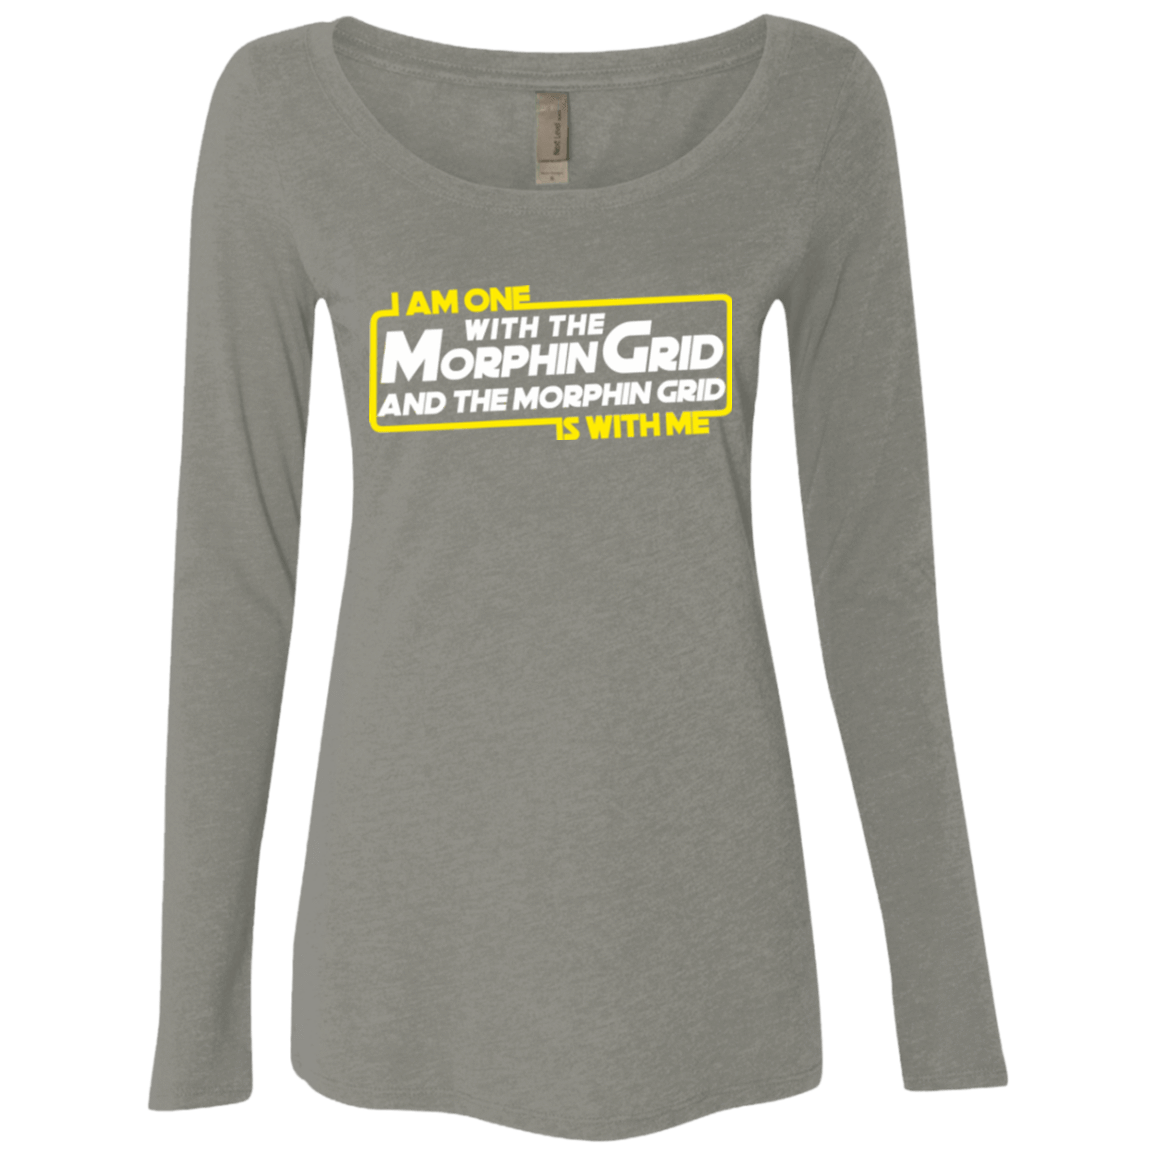 T-Shirts Venetian Grey / Small One With The Women's Triblend Long Sleeve Shirt